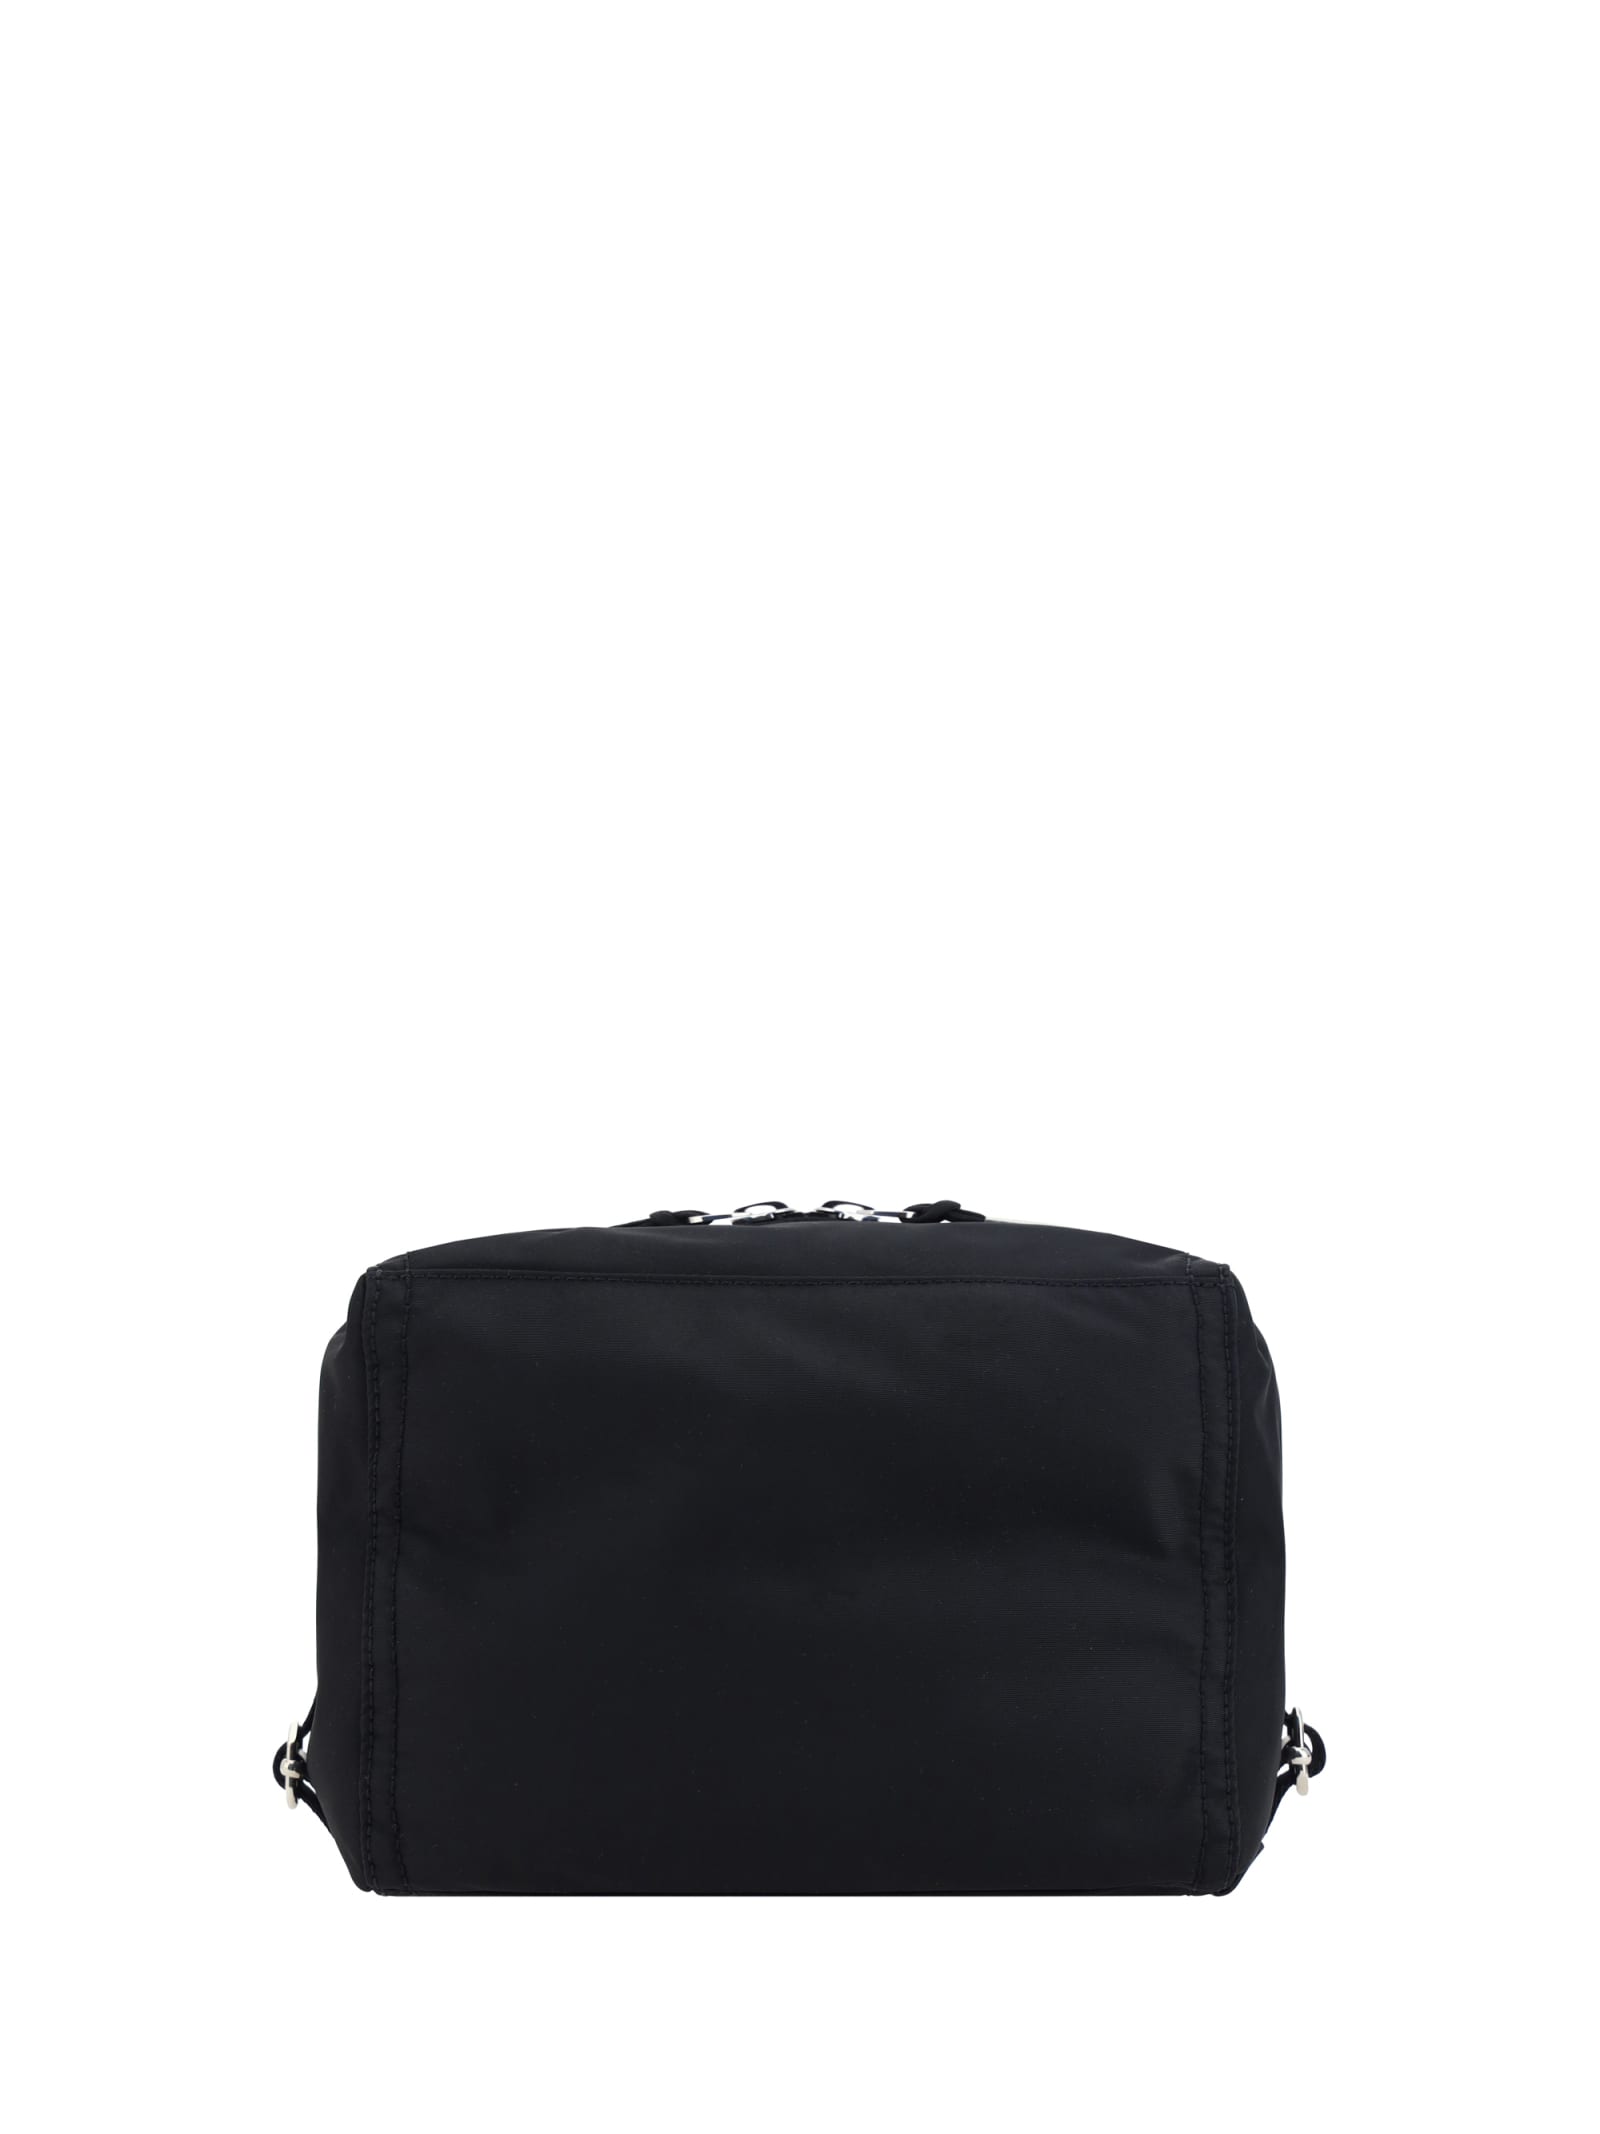 Shop Givenchy Pandora Fanny Pack In Nero